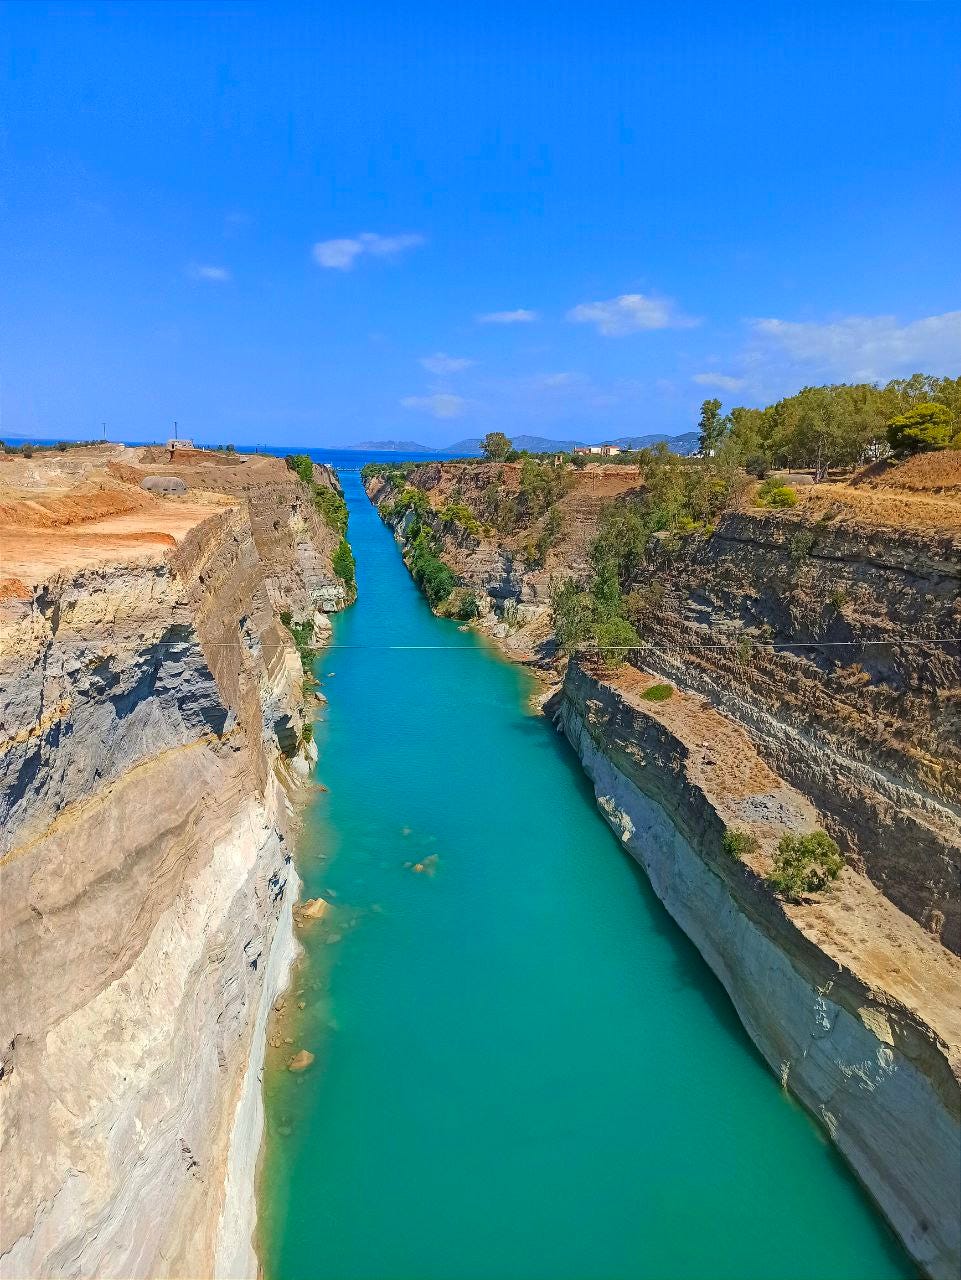 Photo by author. Corinth Canal